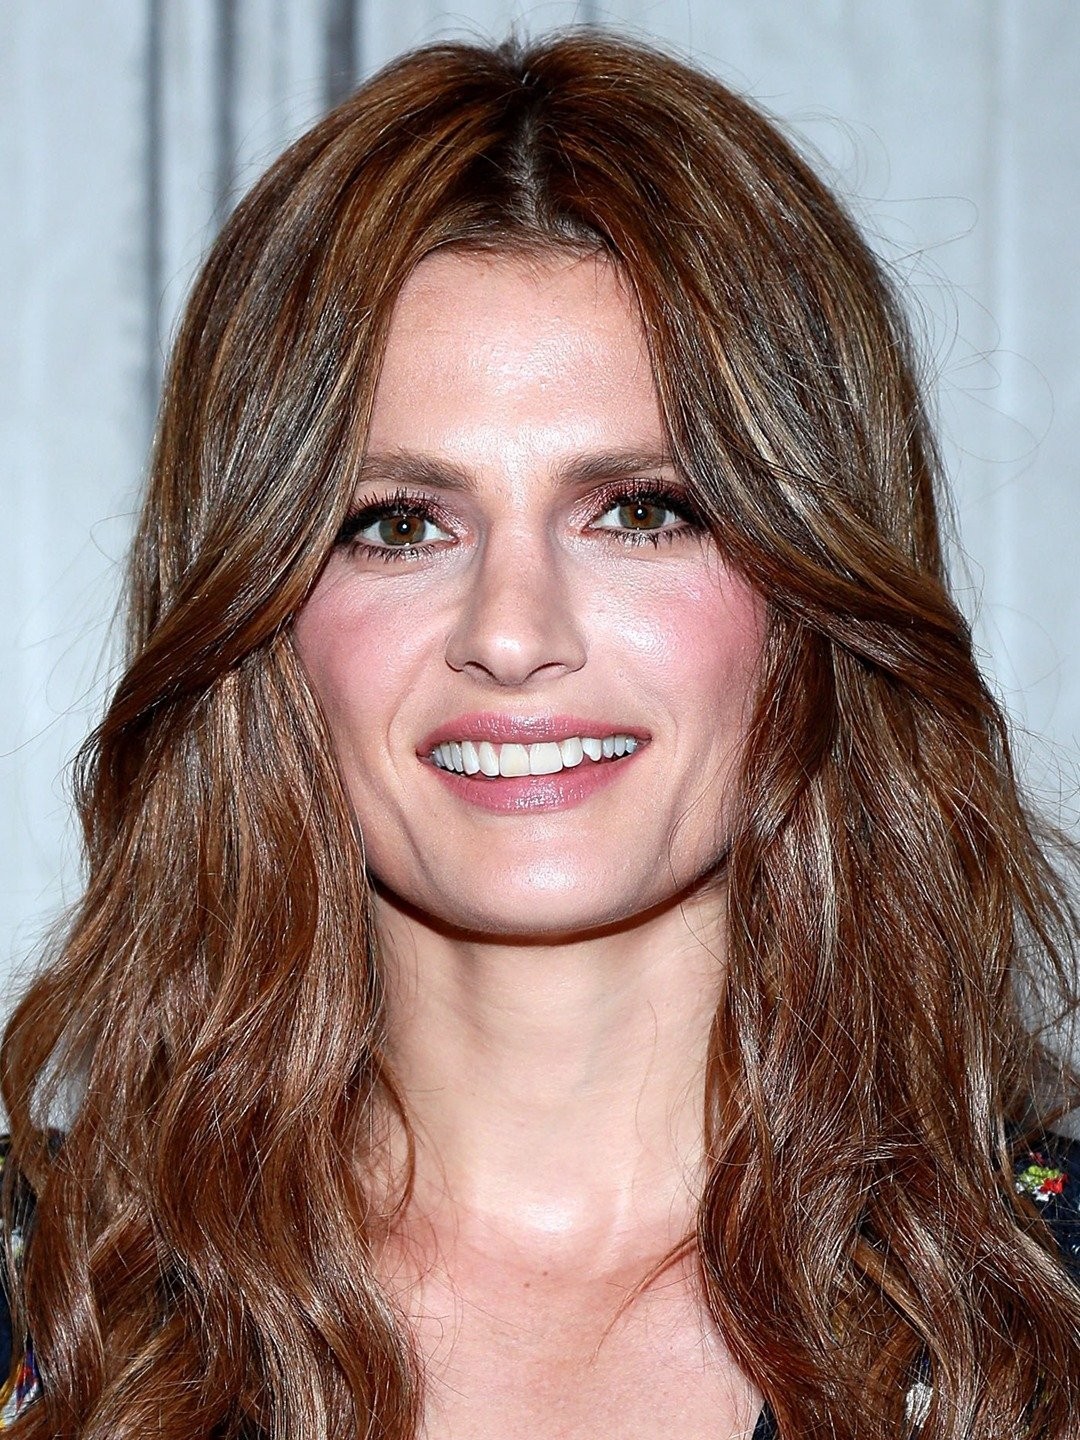 angelo rosales recommends Has Stana Katic Ever Been Nude